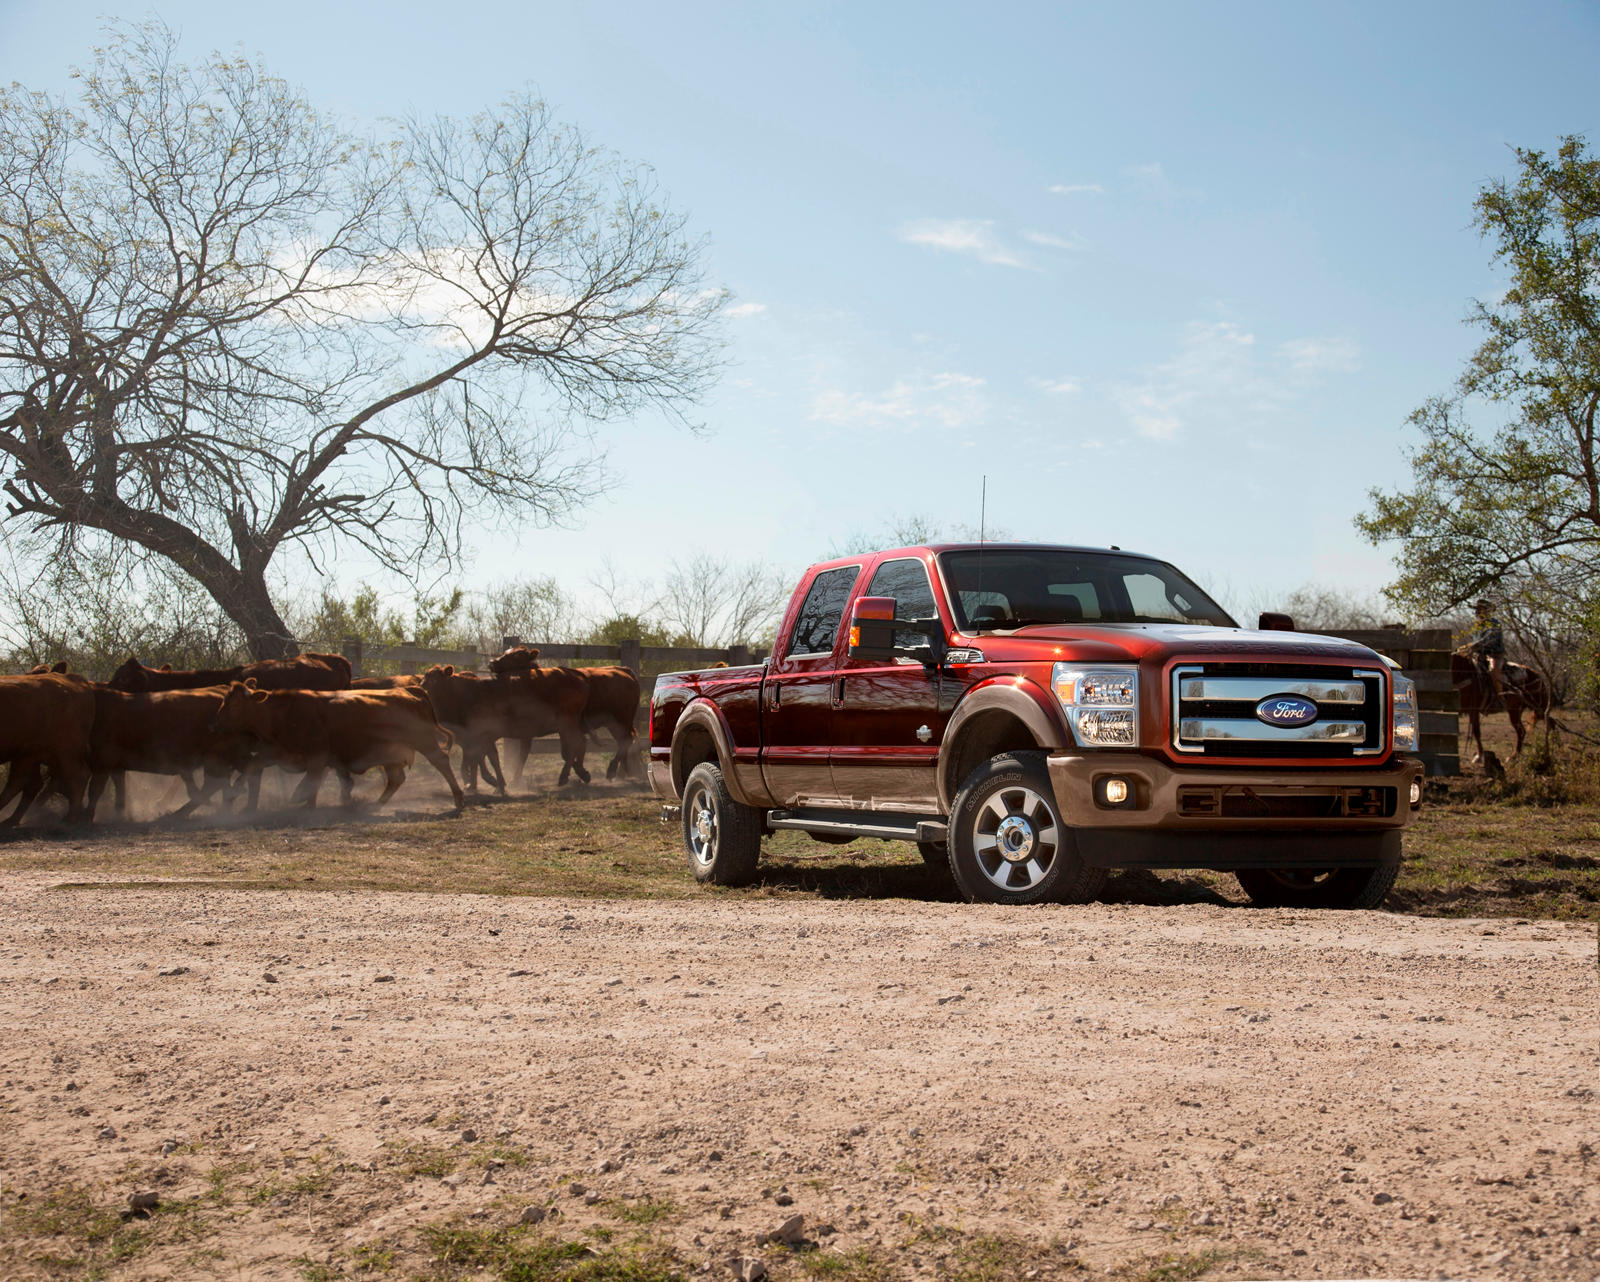 2013 Ford F-Series Super Duty Wallpapers